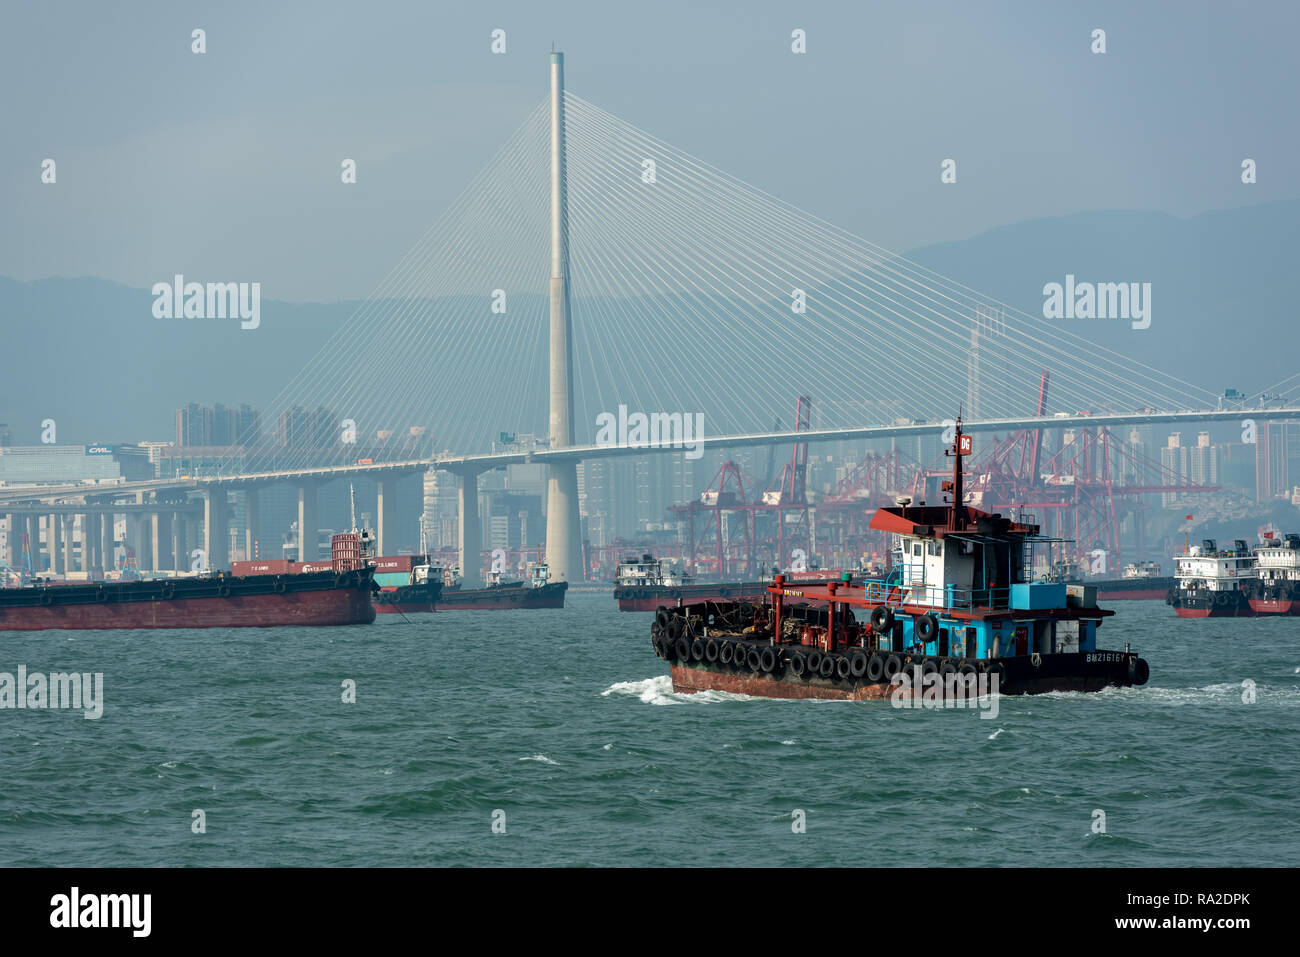 A colourful tugboat navigates the busy shipping lanes around Stonecutters Bridge and Tsing Yi's container terminal in Hong Kong. Stock Photo